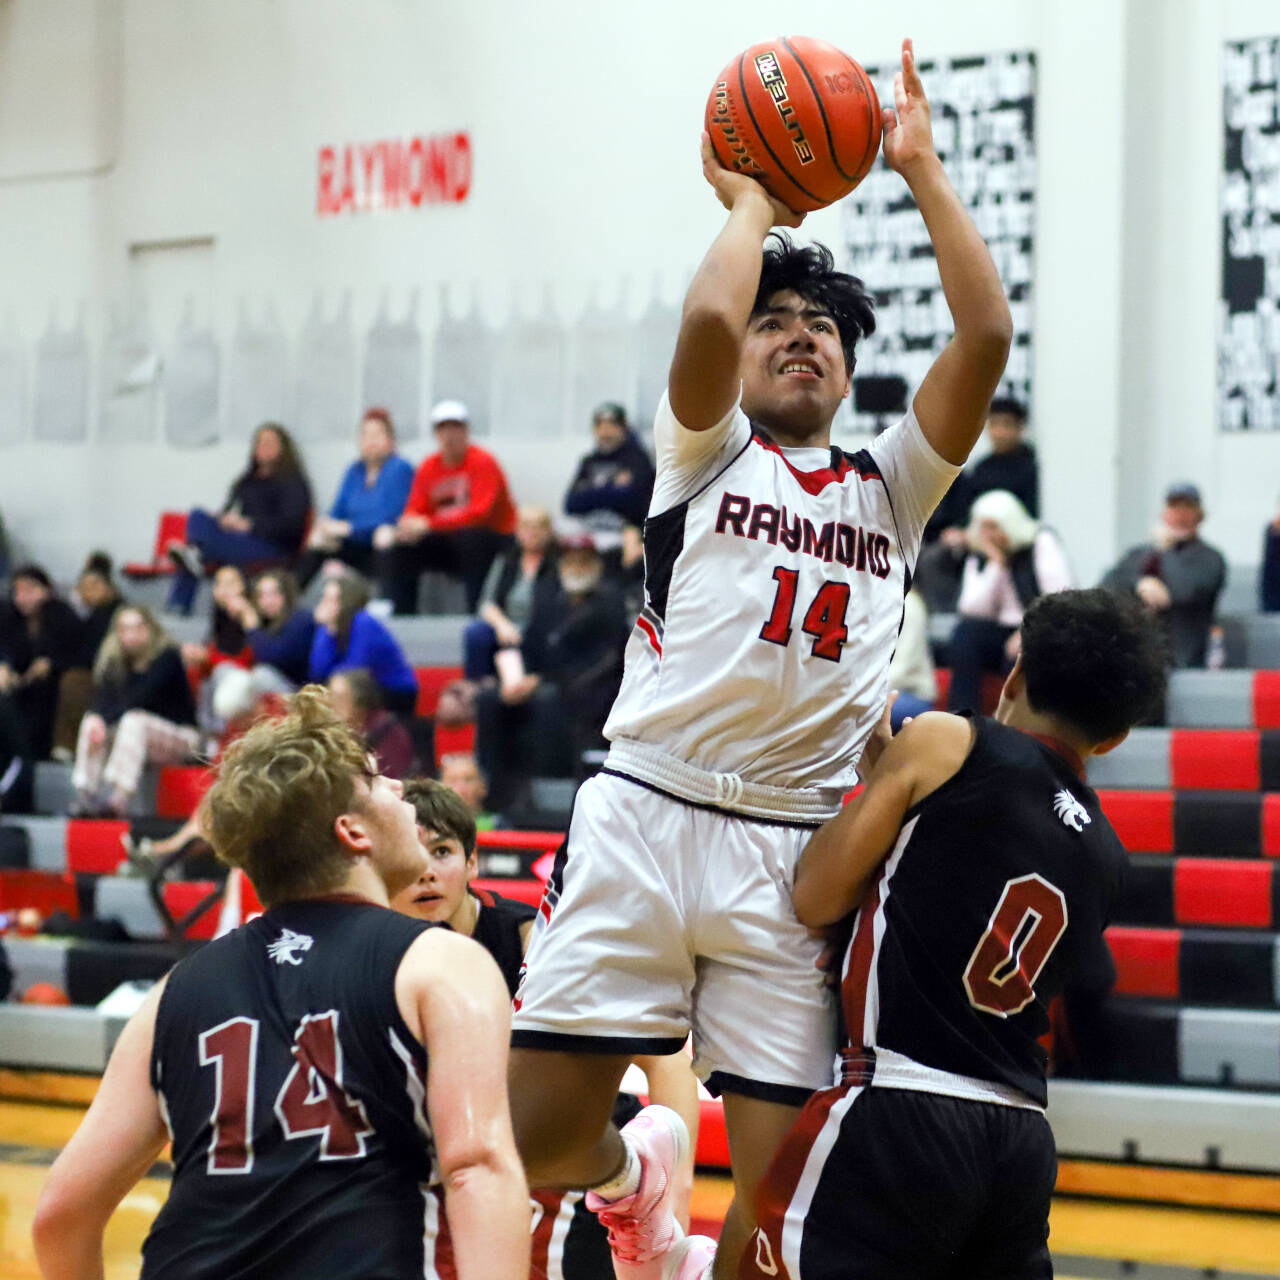 PHOTO BY LARRY BALE Raymond’s Christopher Quintana (14) scores two of his team-high 21 points during a 52-42 win over Ocosta on Wednesday in Raymond.